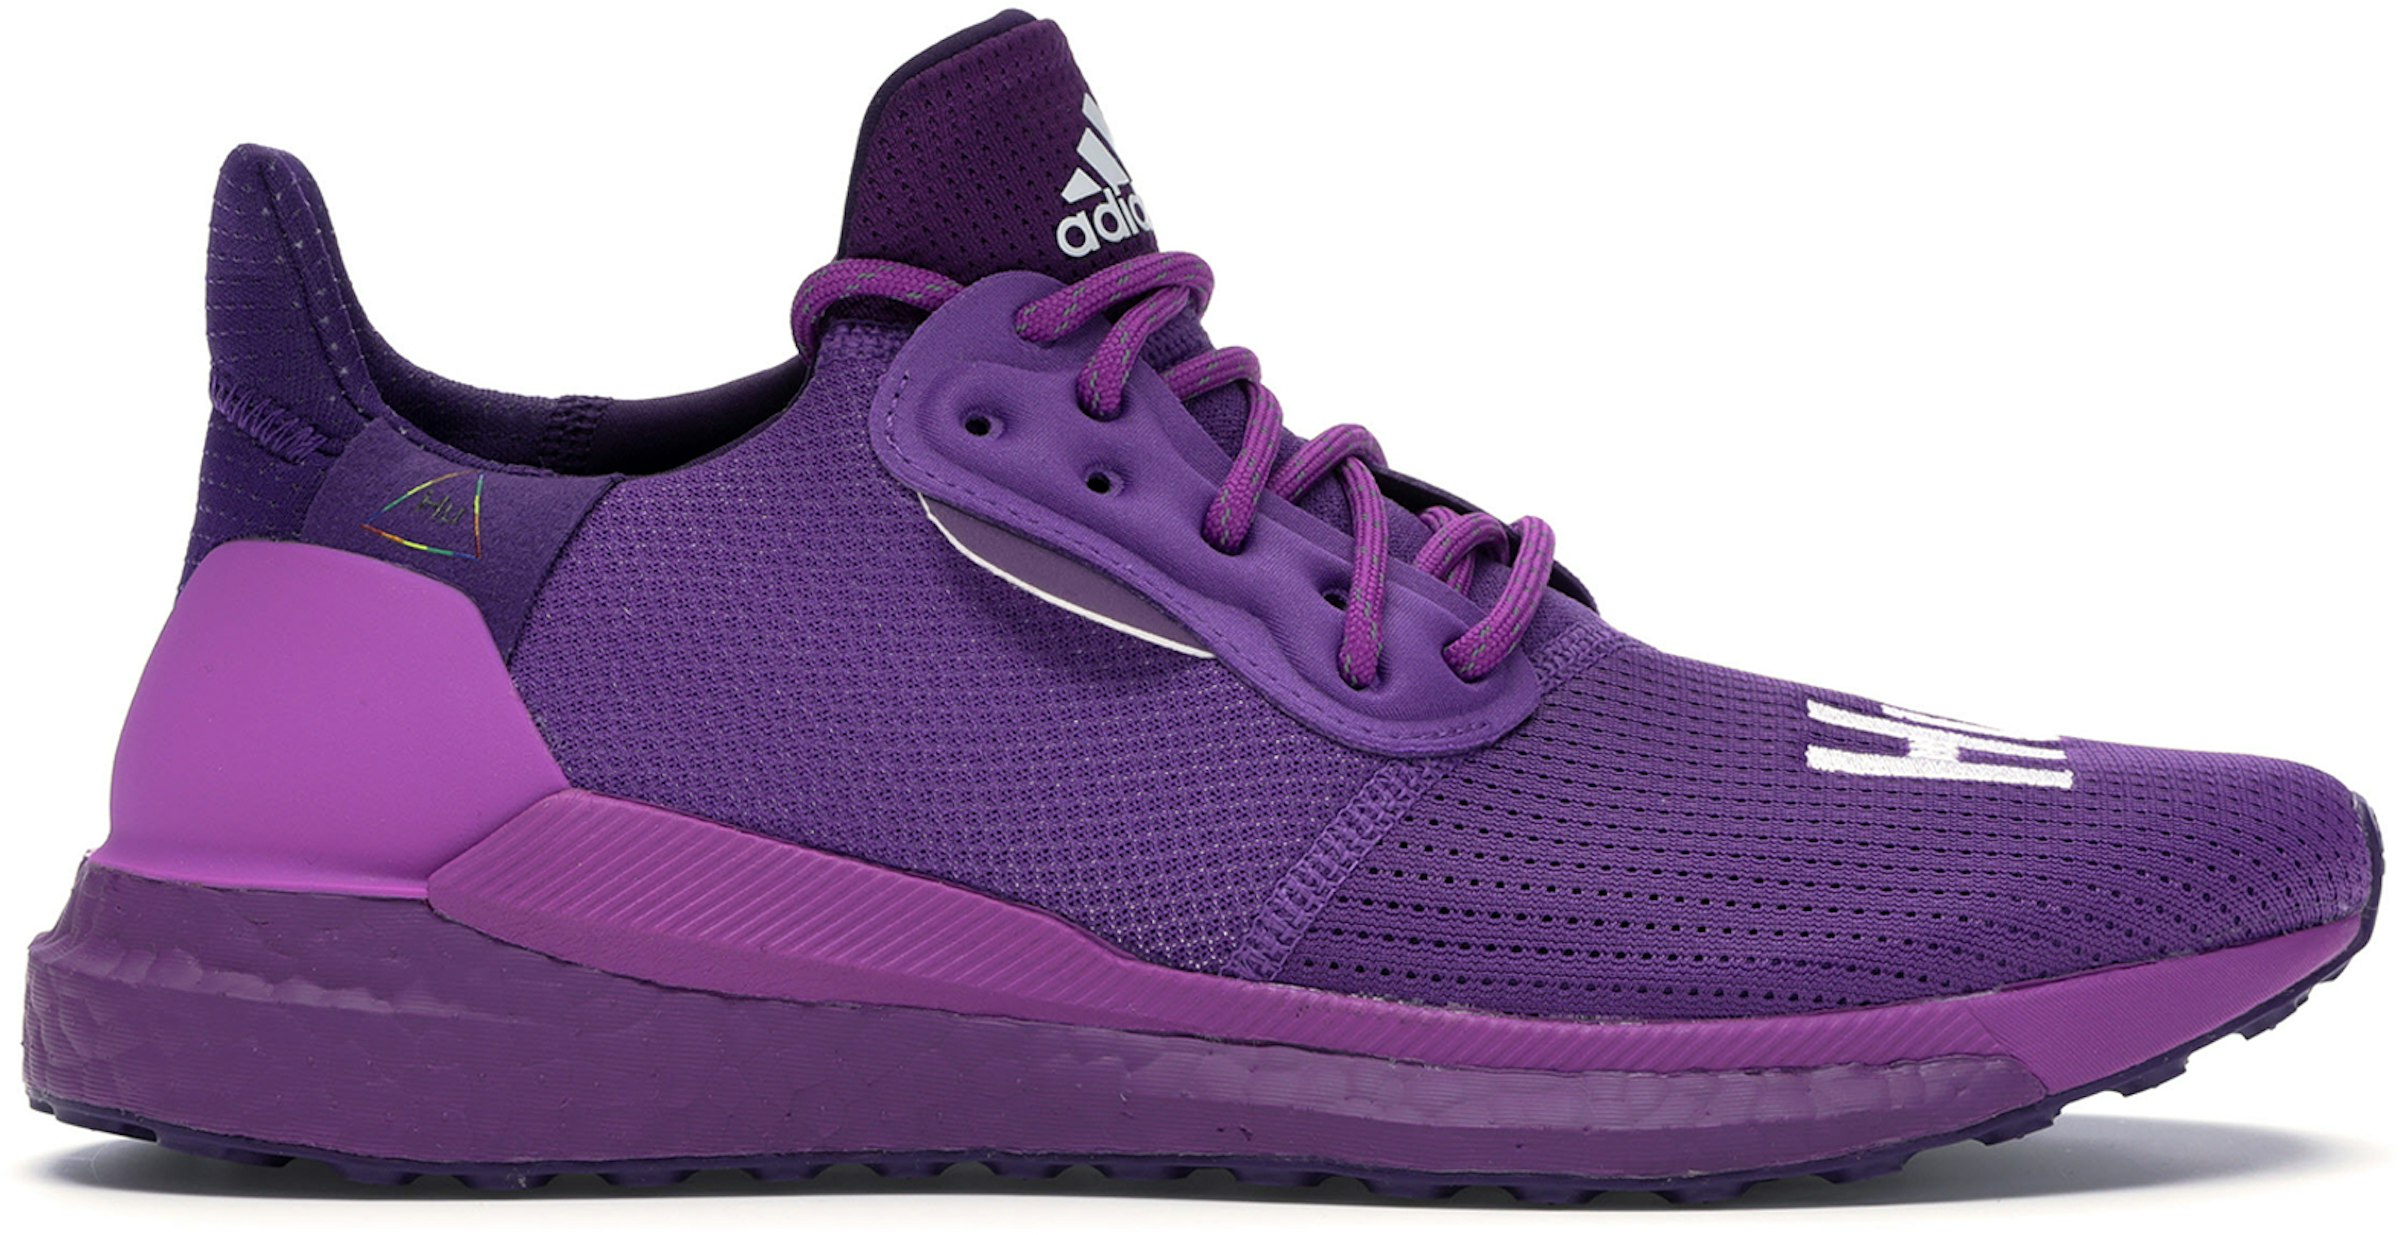 Fitness Wiskunde barbecue adidas Solar Hu PRD Pharrell Now is Her Time Pack Purple Men's - EG7770 - US